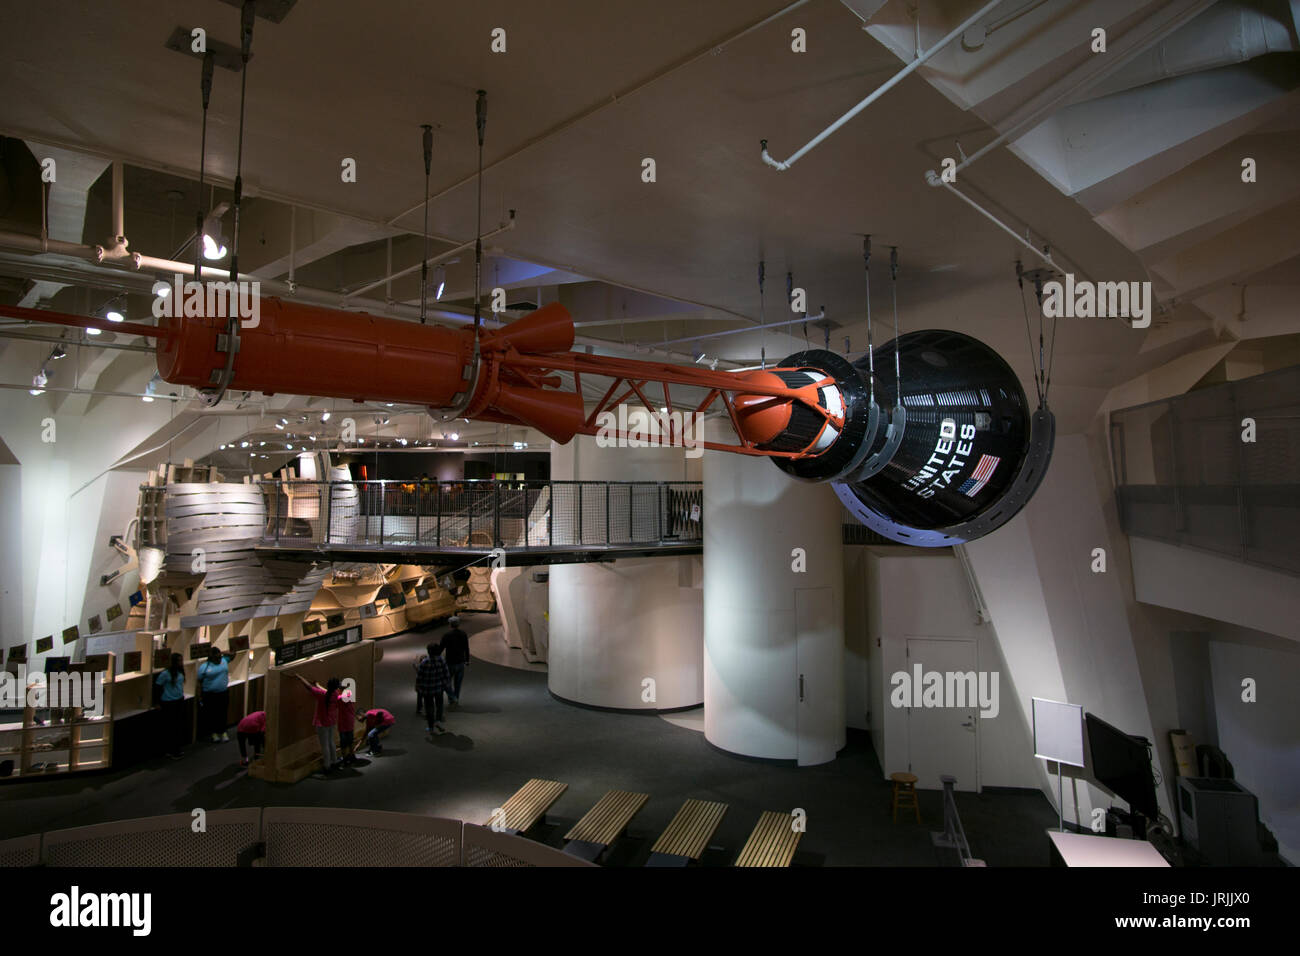 A space capsule on display at the New York Hall of Science in Corona, Queens, New York Stock Photo